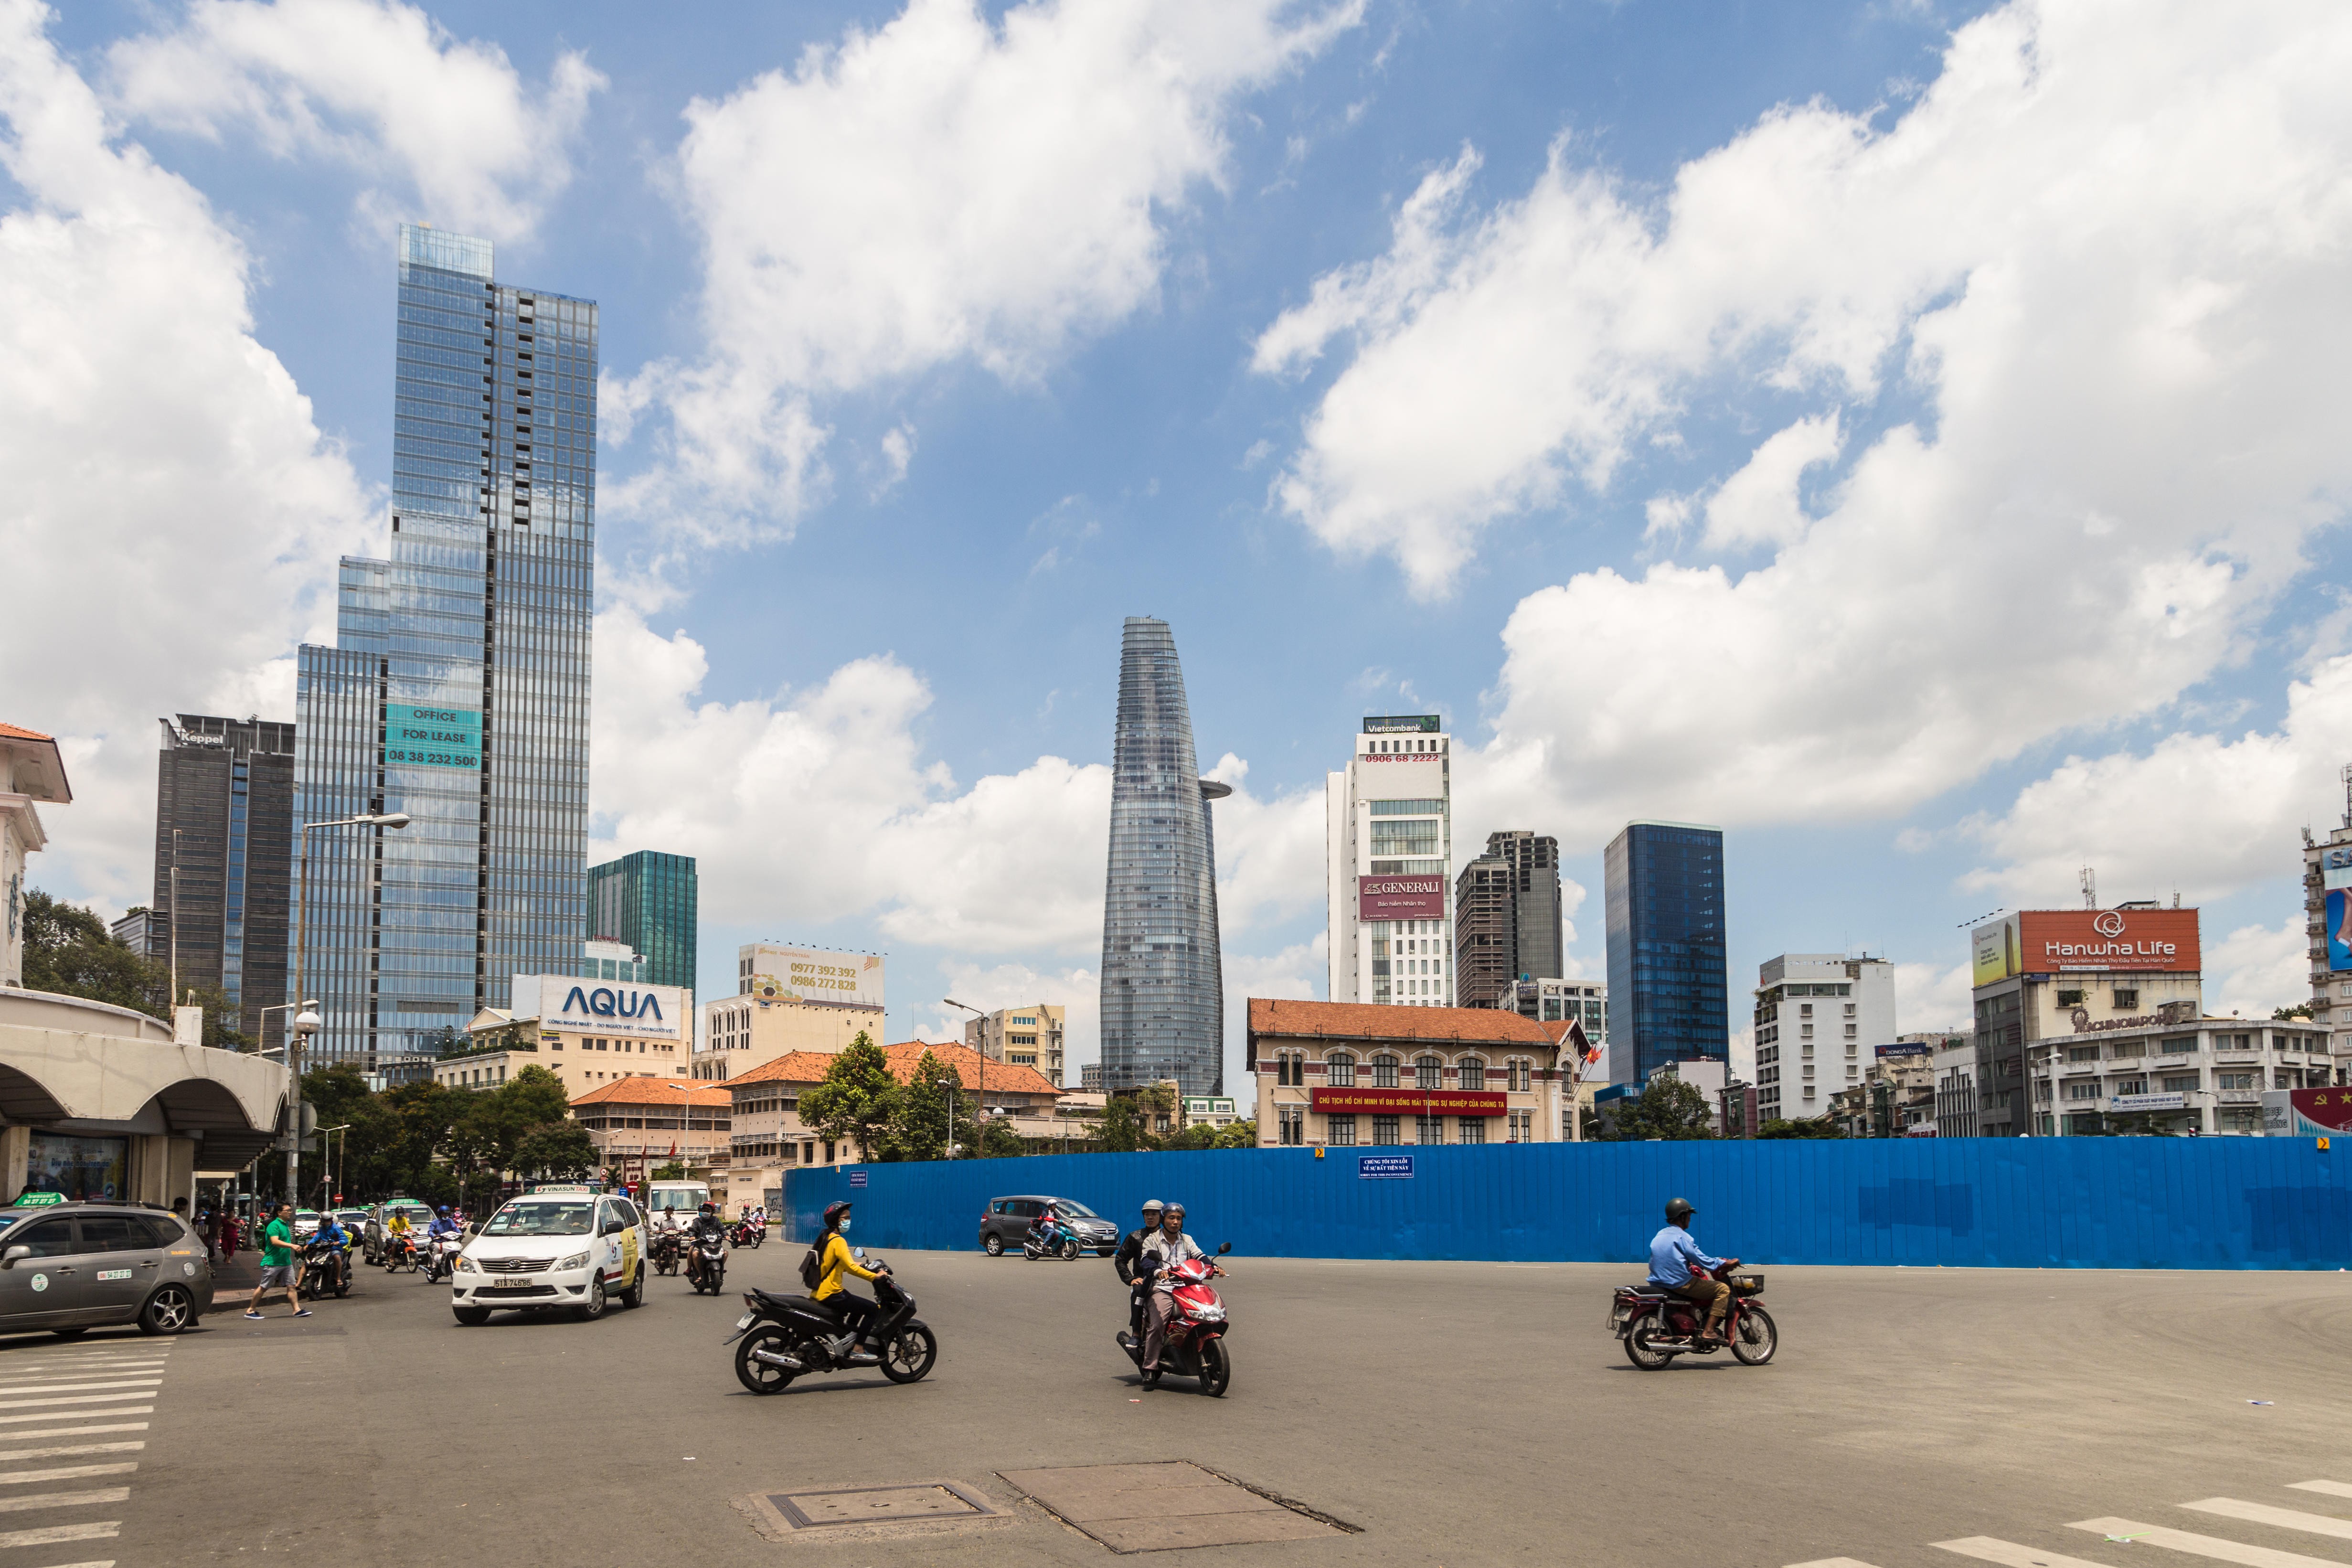 Huge investment is transforming Ho Chi Minh City’s skyline with lots of development around the landmark Ben Thanh market.